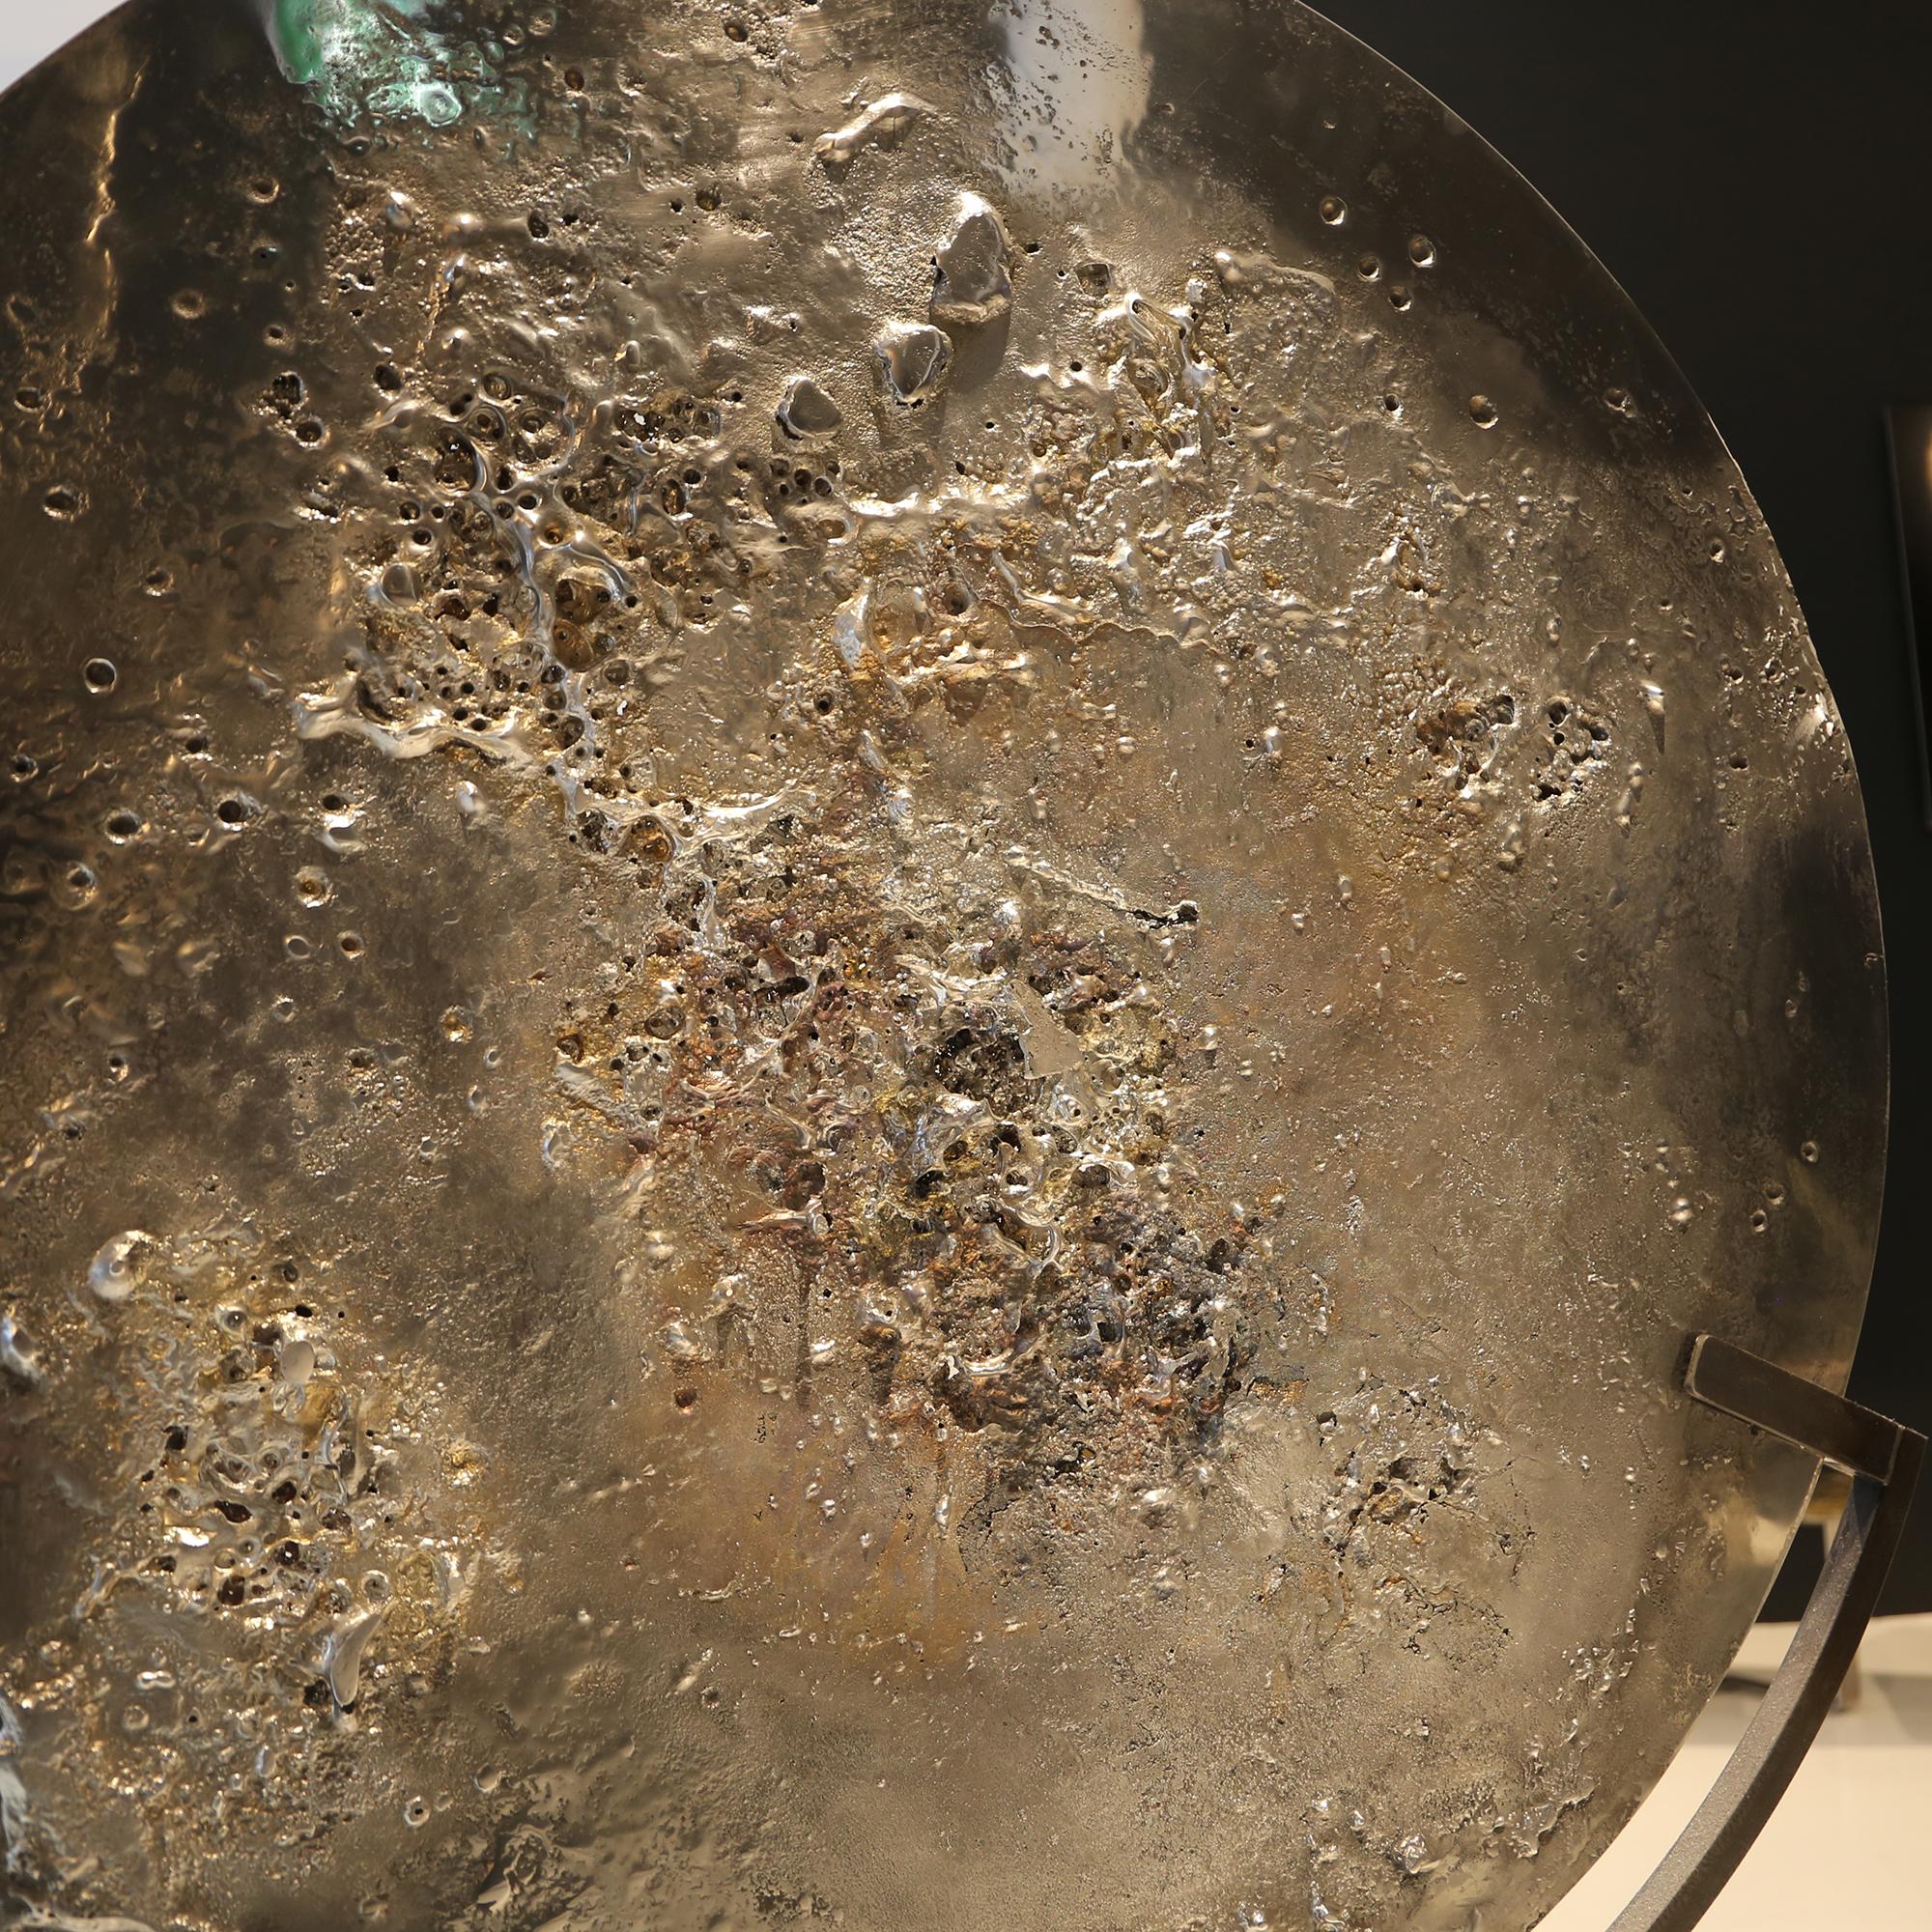 In stock: This piece of art is a pure Alchemy experimentation with pewter, made in France.
It is made of melted pewter, being subjected to Hot-cold thermal shocks. Cooled bubbles, colored stains, craters emerged from this secret experimentation.